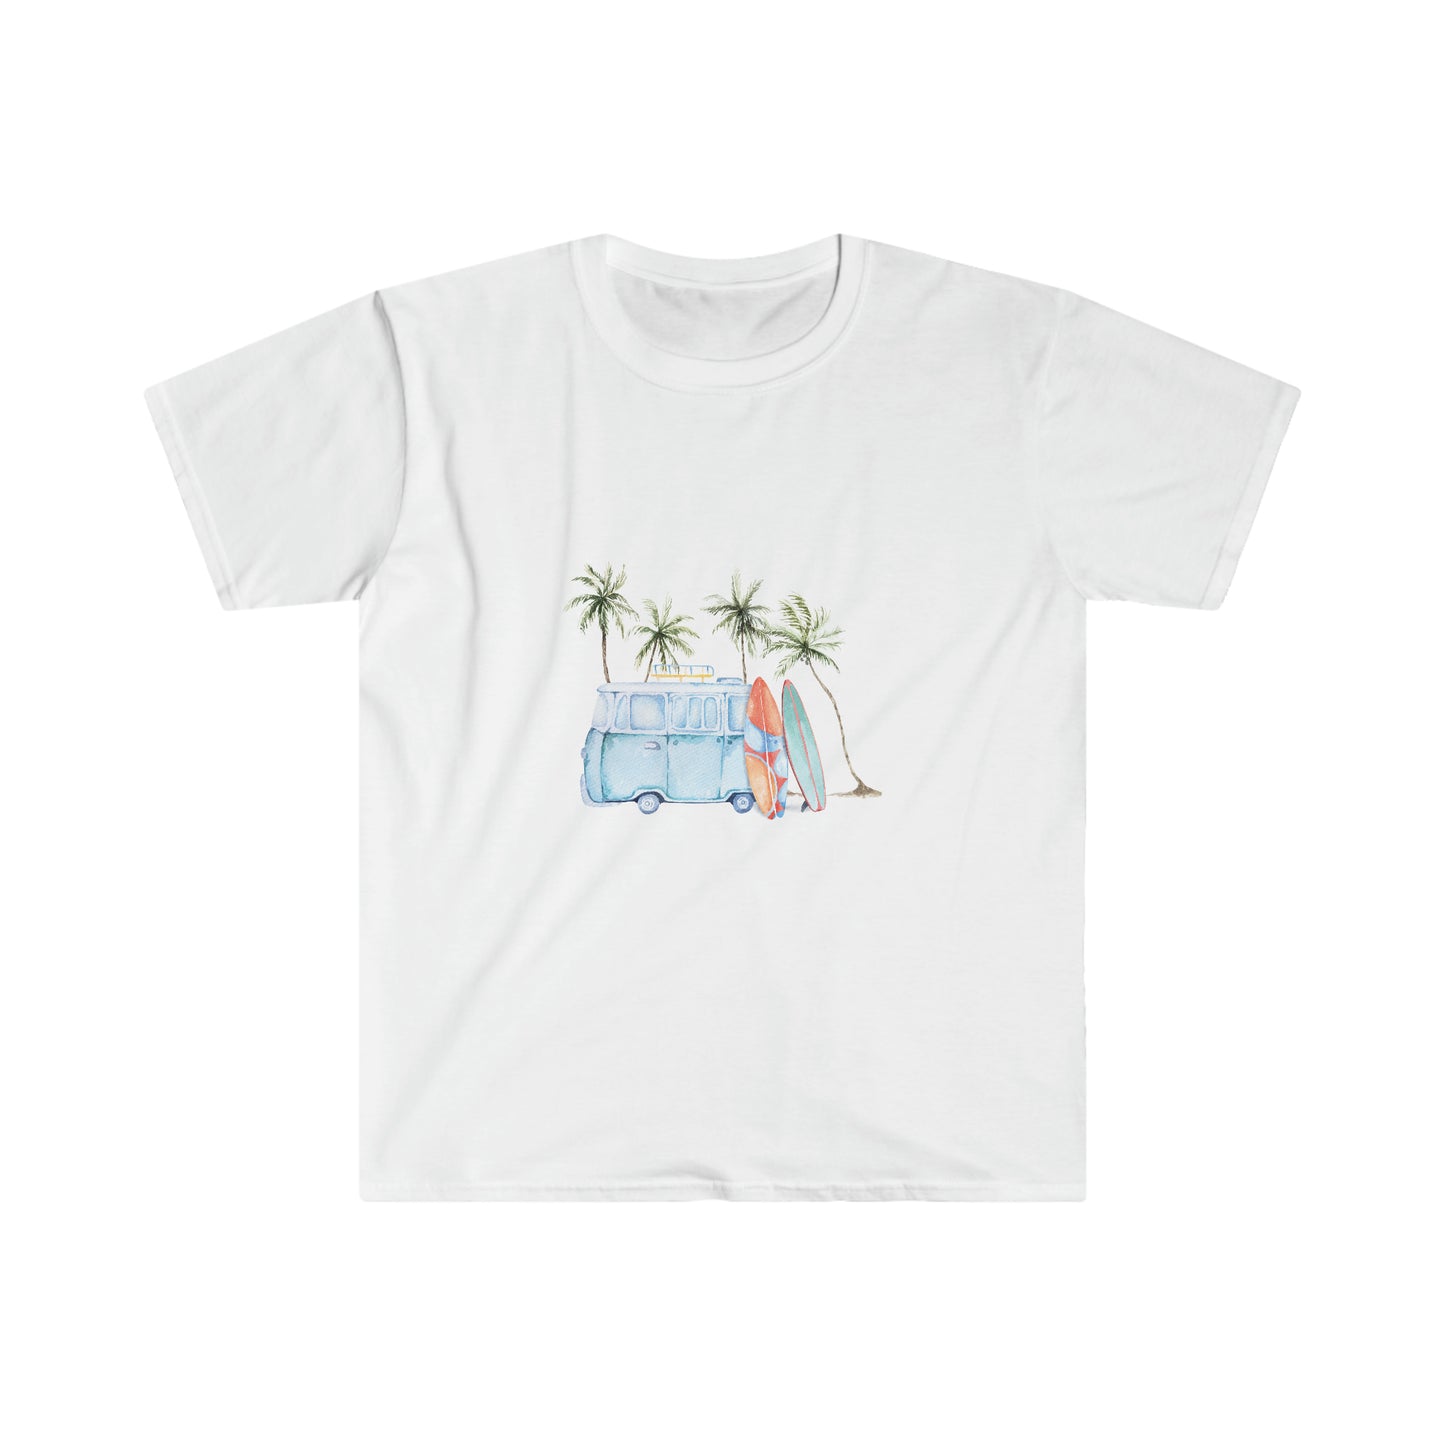 Unisex Softstyle T-Shirt with Surfwear Print